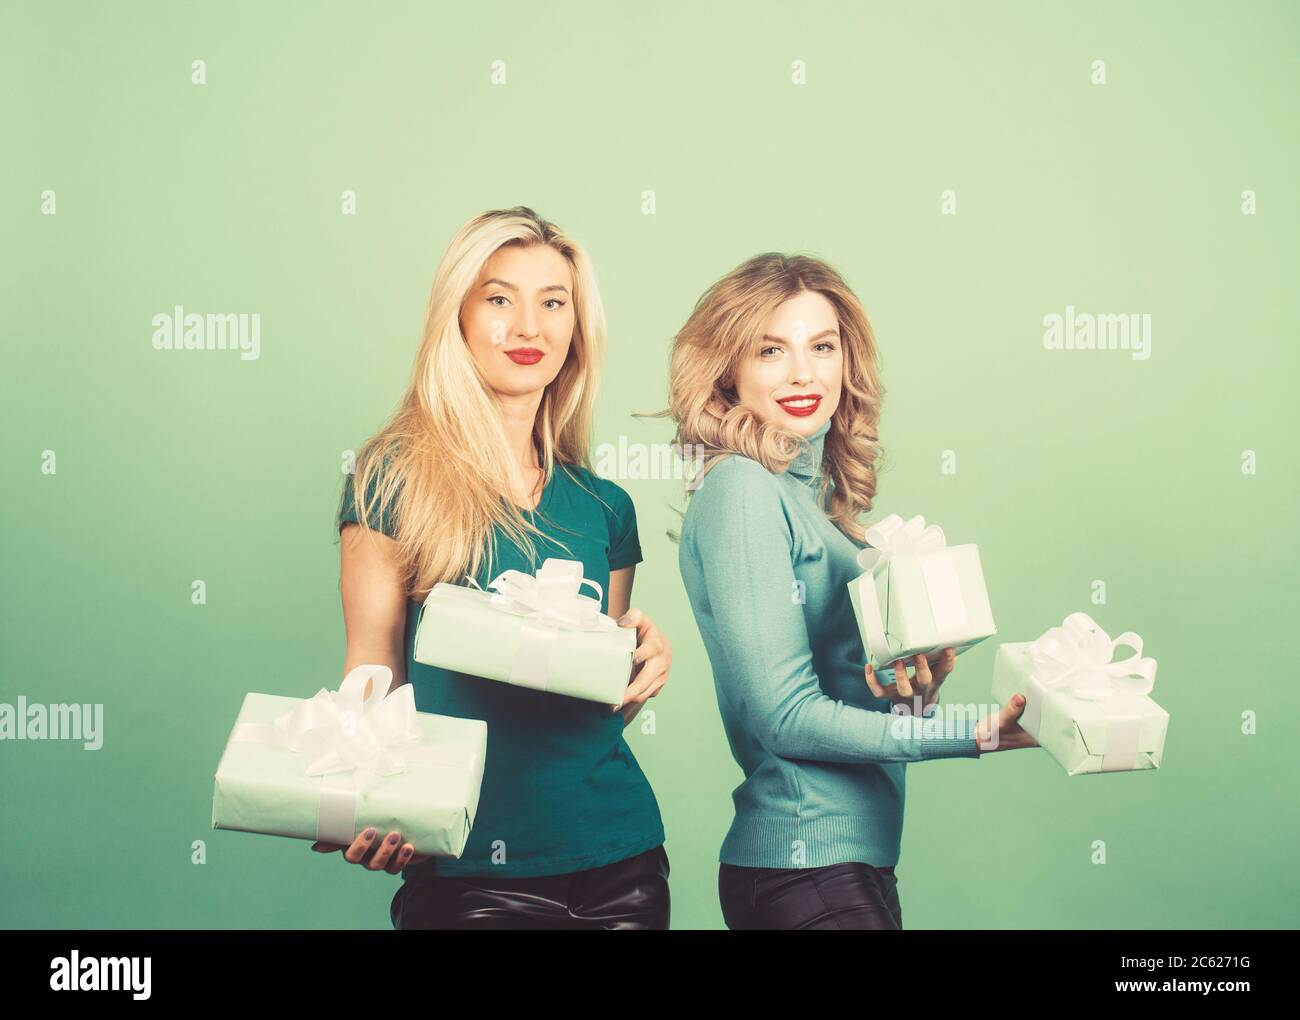 Fashion lifestyle portrait of two girls friends holding birthday bright presents, wearing trendy clothes. Going crazy and making funny faces. Stock Photo